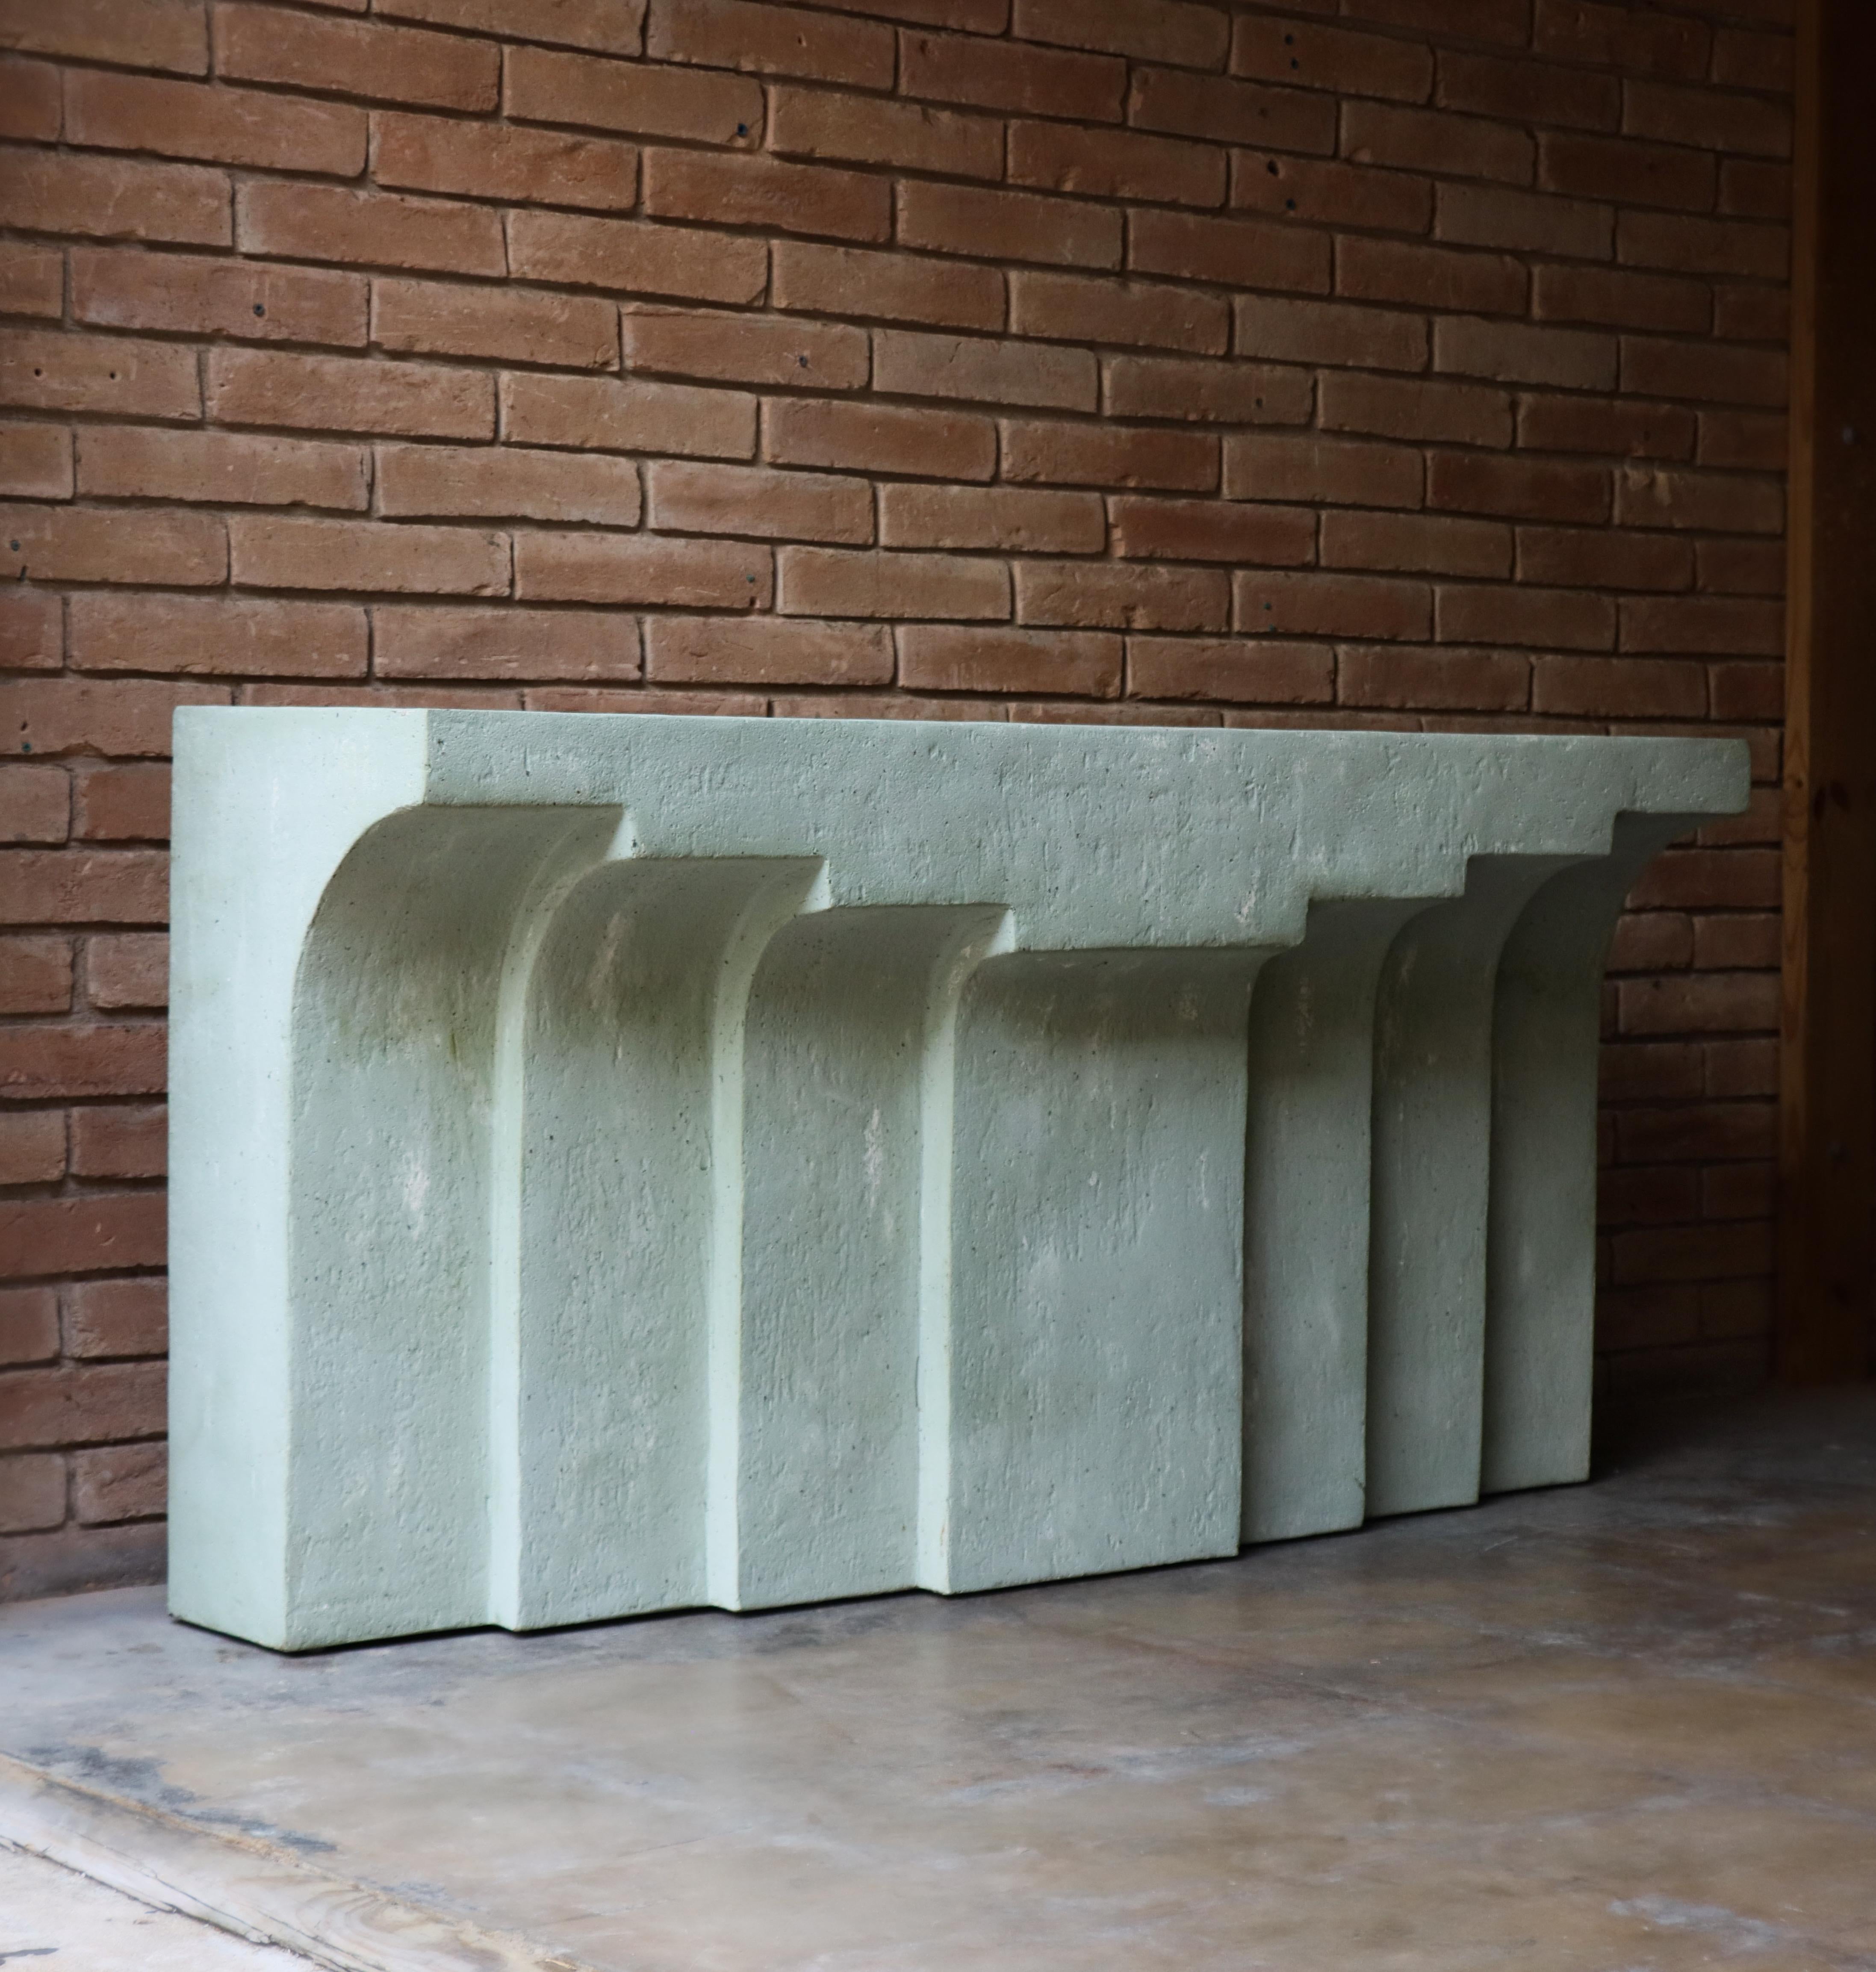 Unique modernist faux concrete console table. Features a beautiful pale sea foam or mossy green textured color. 

Fiberglass construction with textured surface to resemble cast concrete. Stepped modern arched design. The console is finished on all